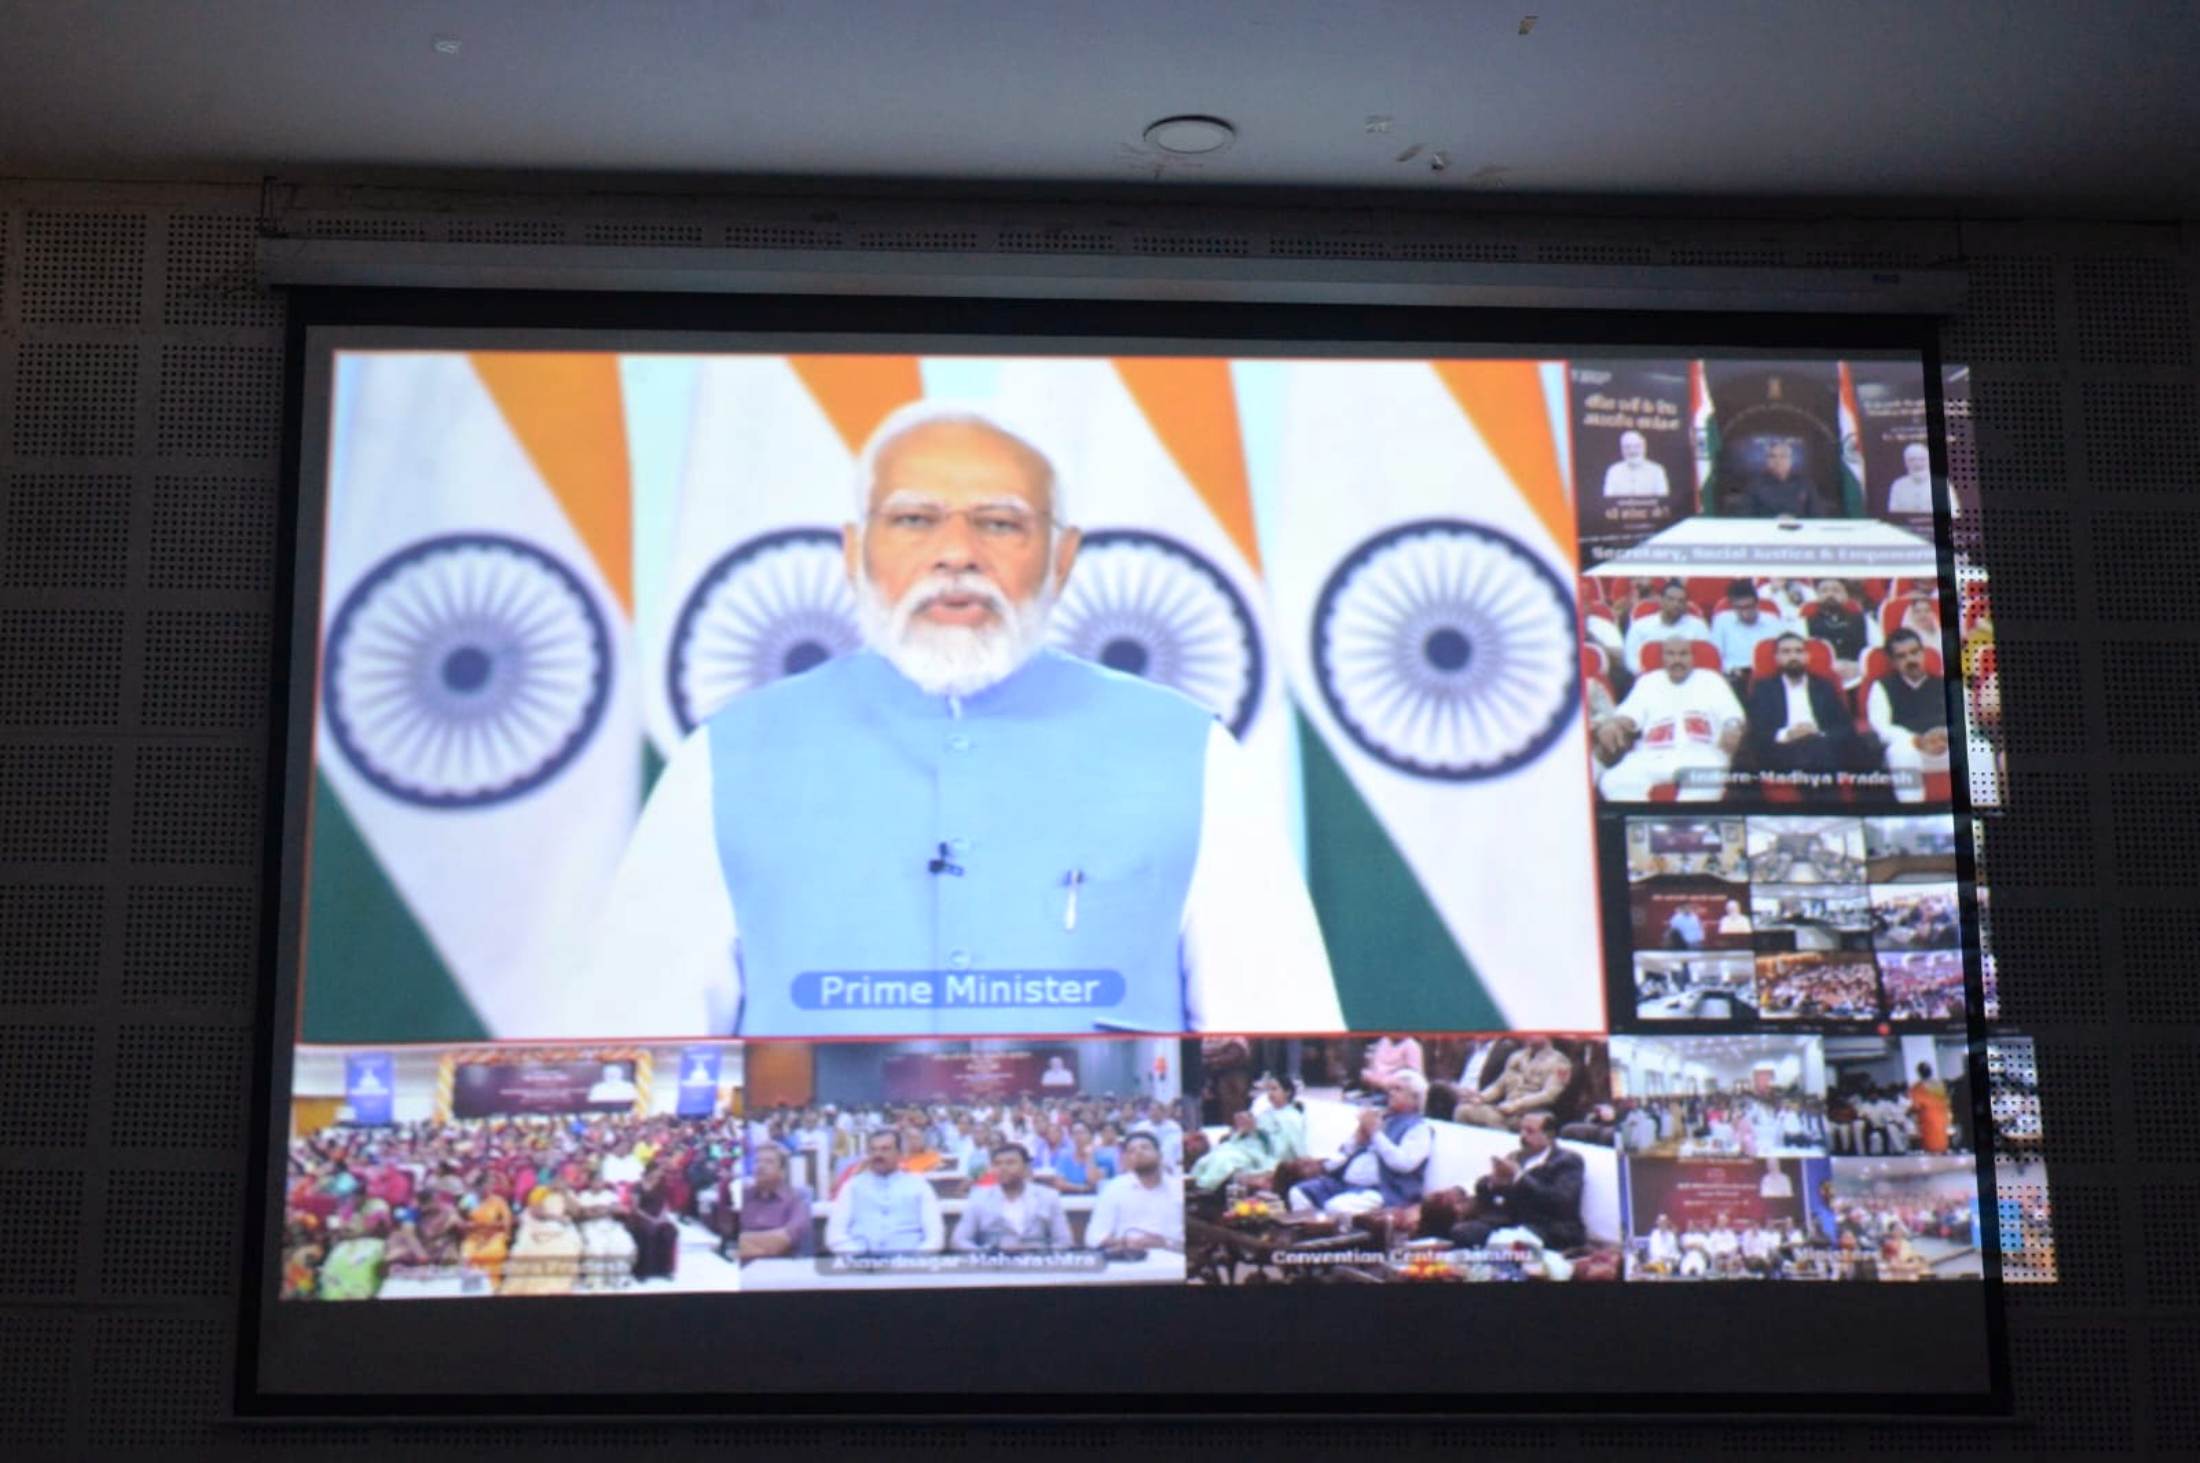 Prime Minister Modi Engages in Dialogue Program with Marginalized Groups, Launches Social Welfare Portal